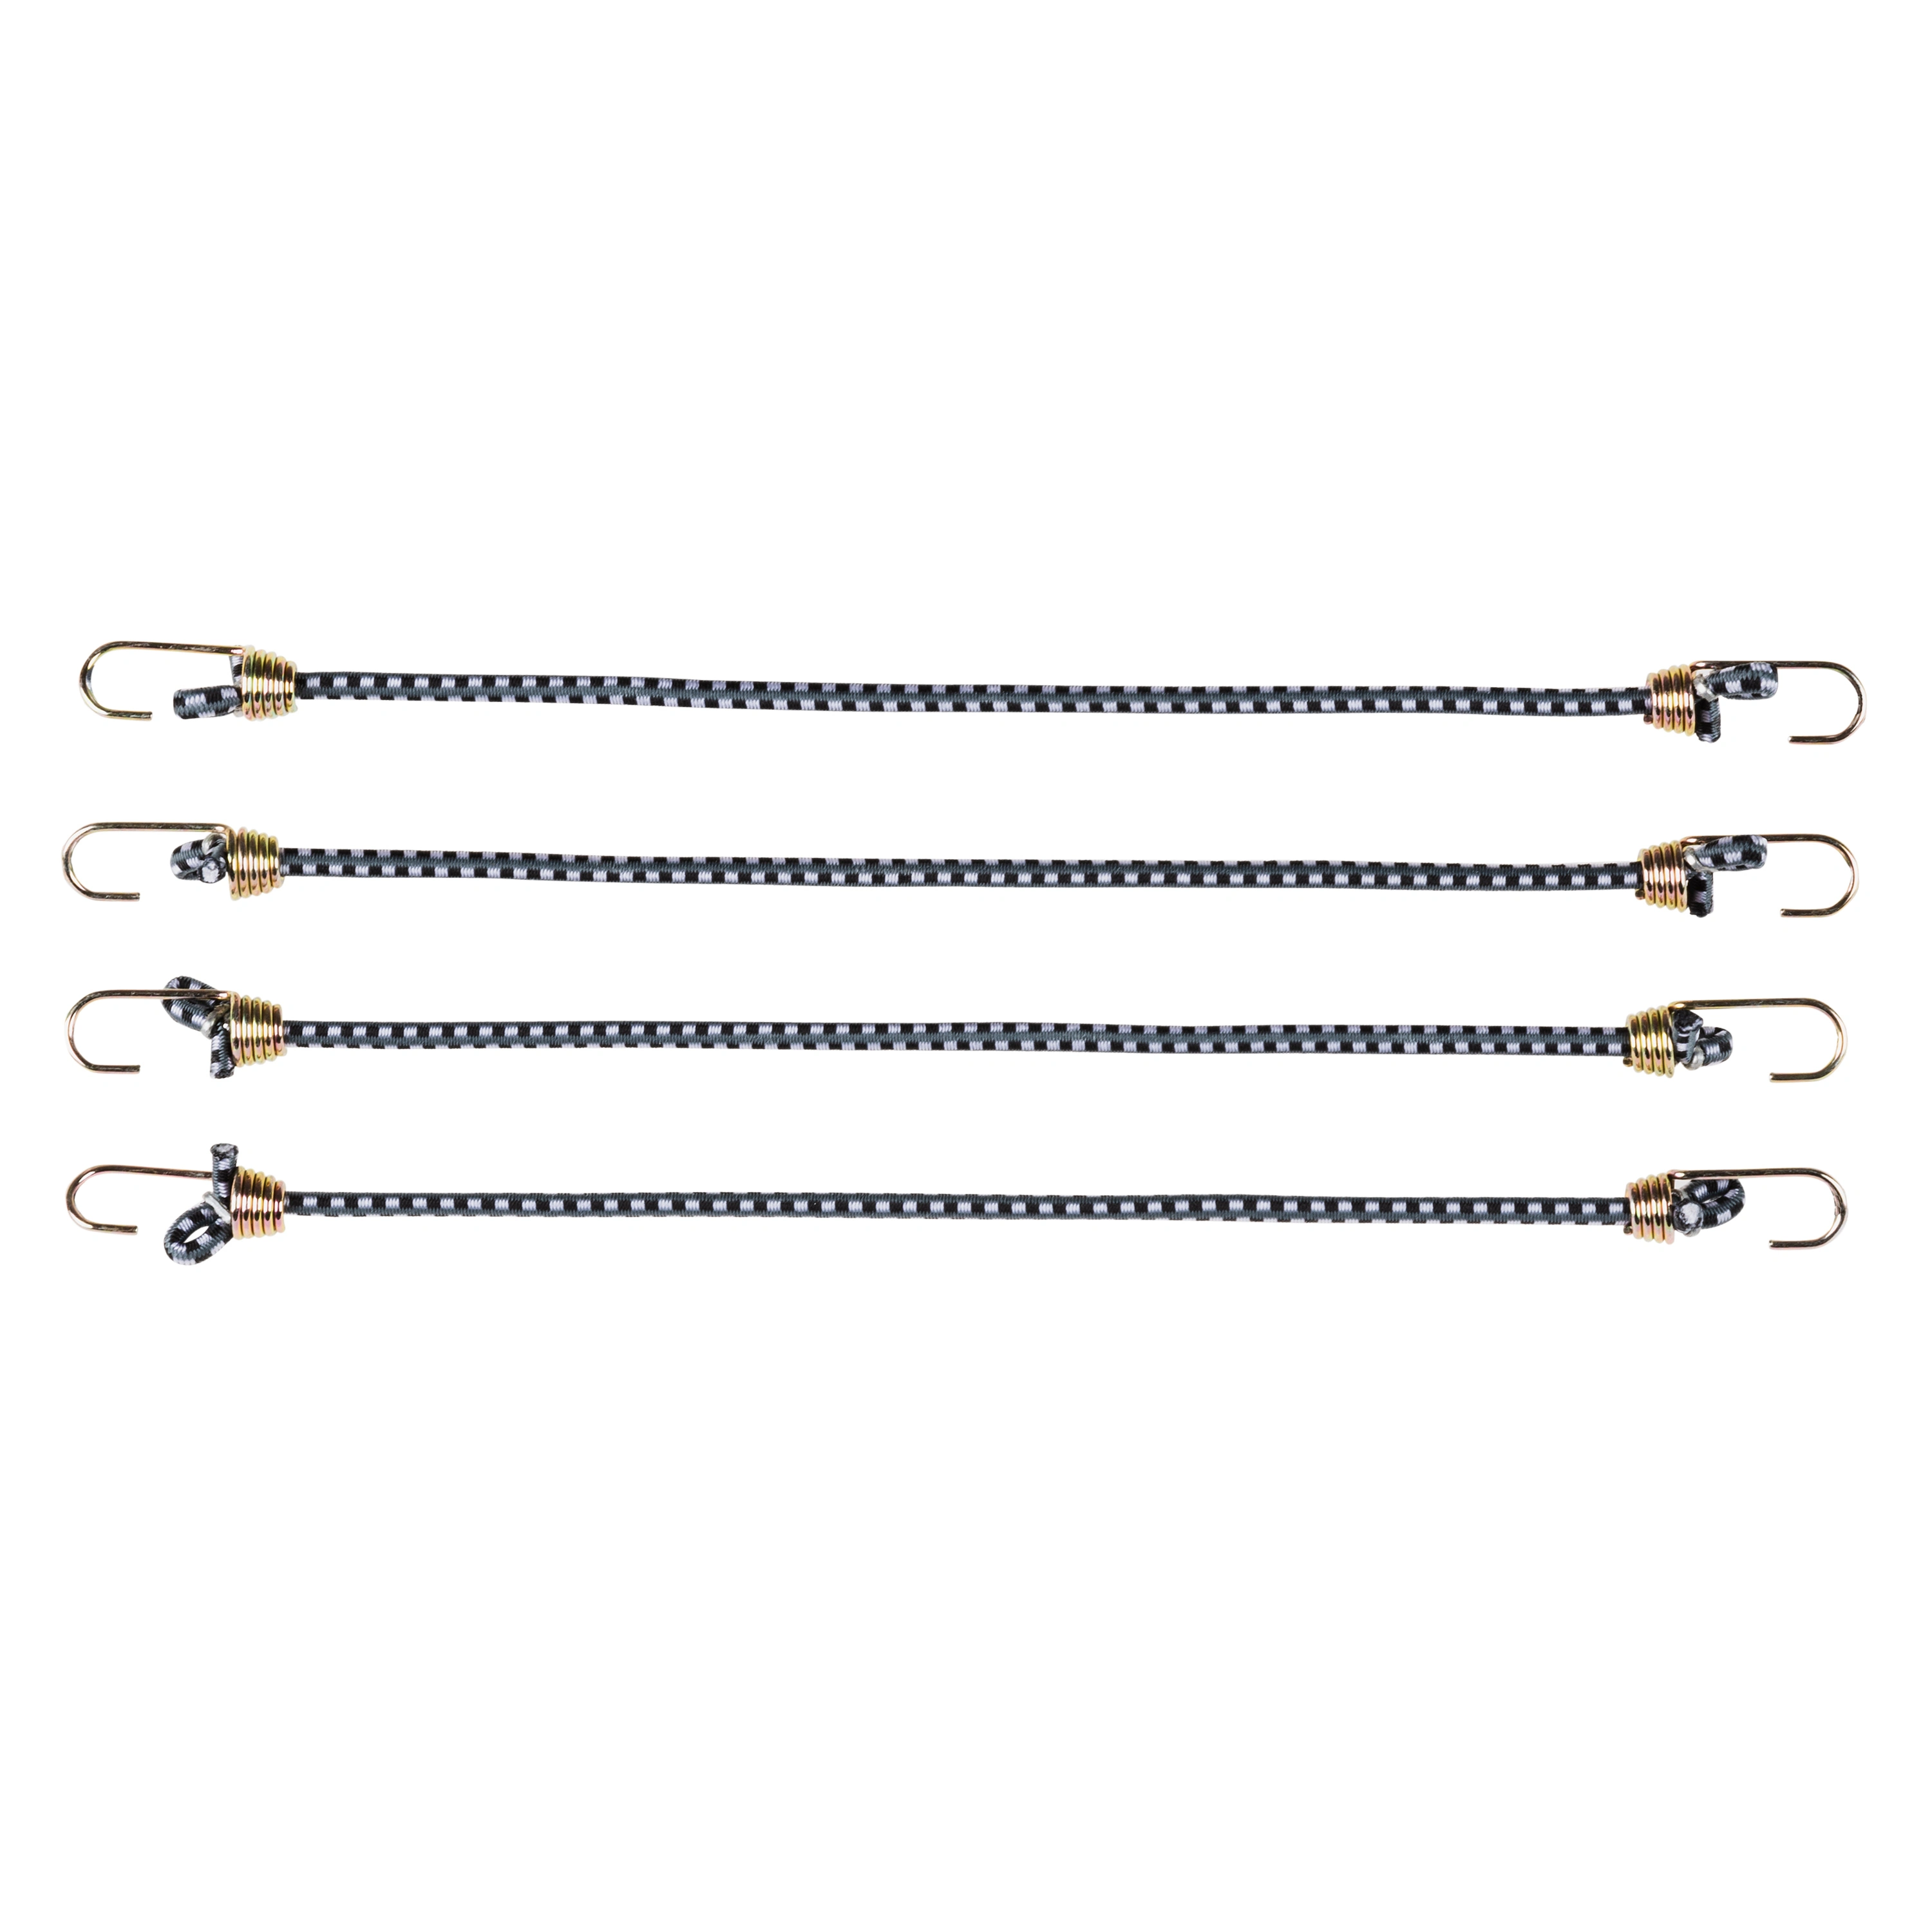 10" Mini Bungee Cord, 20 Pack variant image view